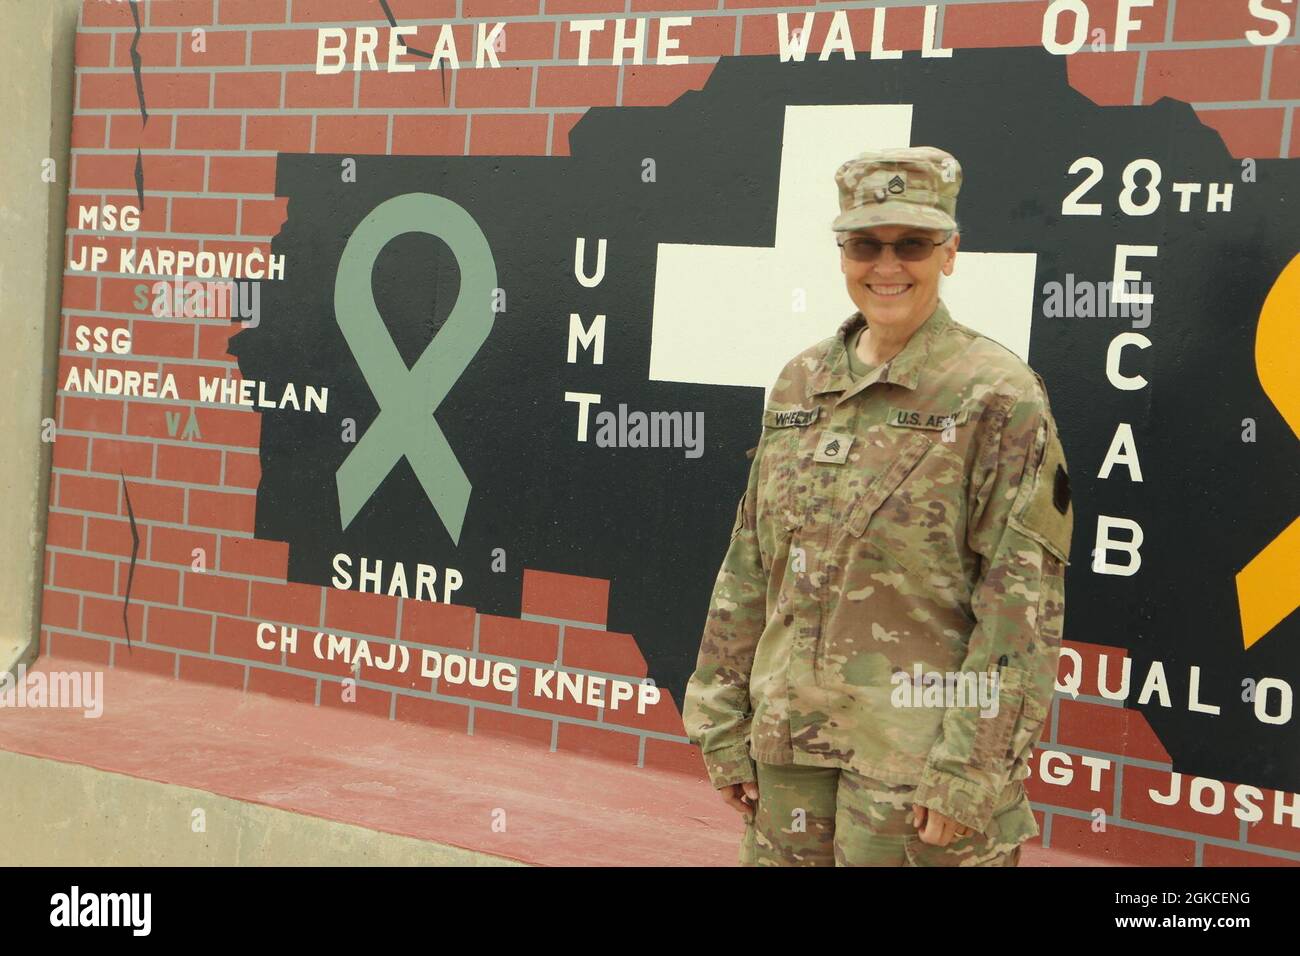 U.S. Army Staff Sgt. Andrea Whelan, victim advocate for the 28th Expeditionary Combat Aviation Brigade, poses for a photo at an airfield in the 28th ECAB's area of operations in the Middle East.     Whelan enlisted in the U.S. Army at age 32 after losing a truth or dare bet. She says that someone told her she would not make through basic training, and now she is standing at retirement's doorstep. She is currently attending Liberty University pursuing a bachelor's degree in psychology.    "Women's month is a time of reflection for me", said Whelan. "I look at all the of the great women who forg Stock Photo